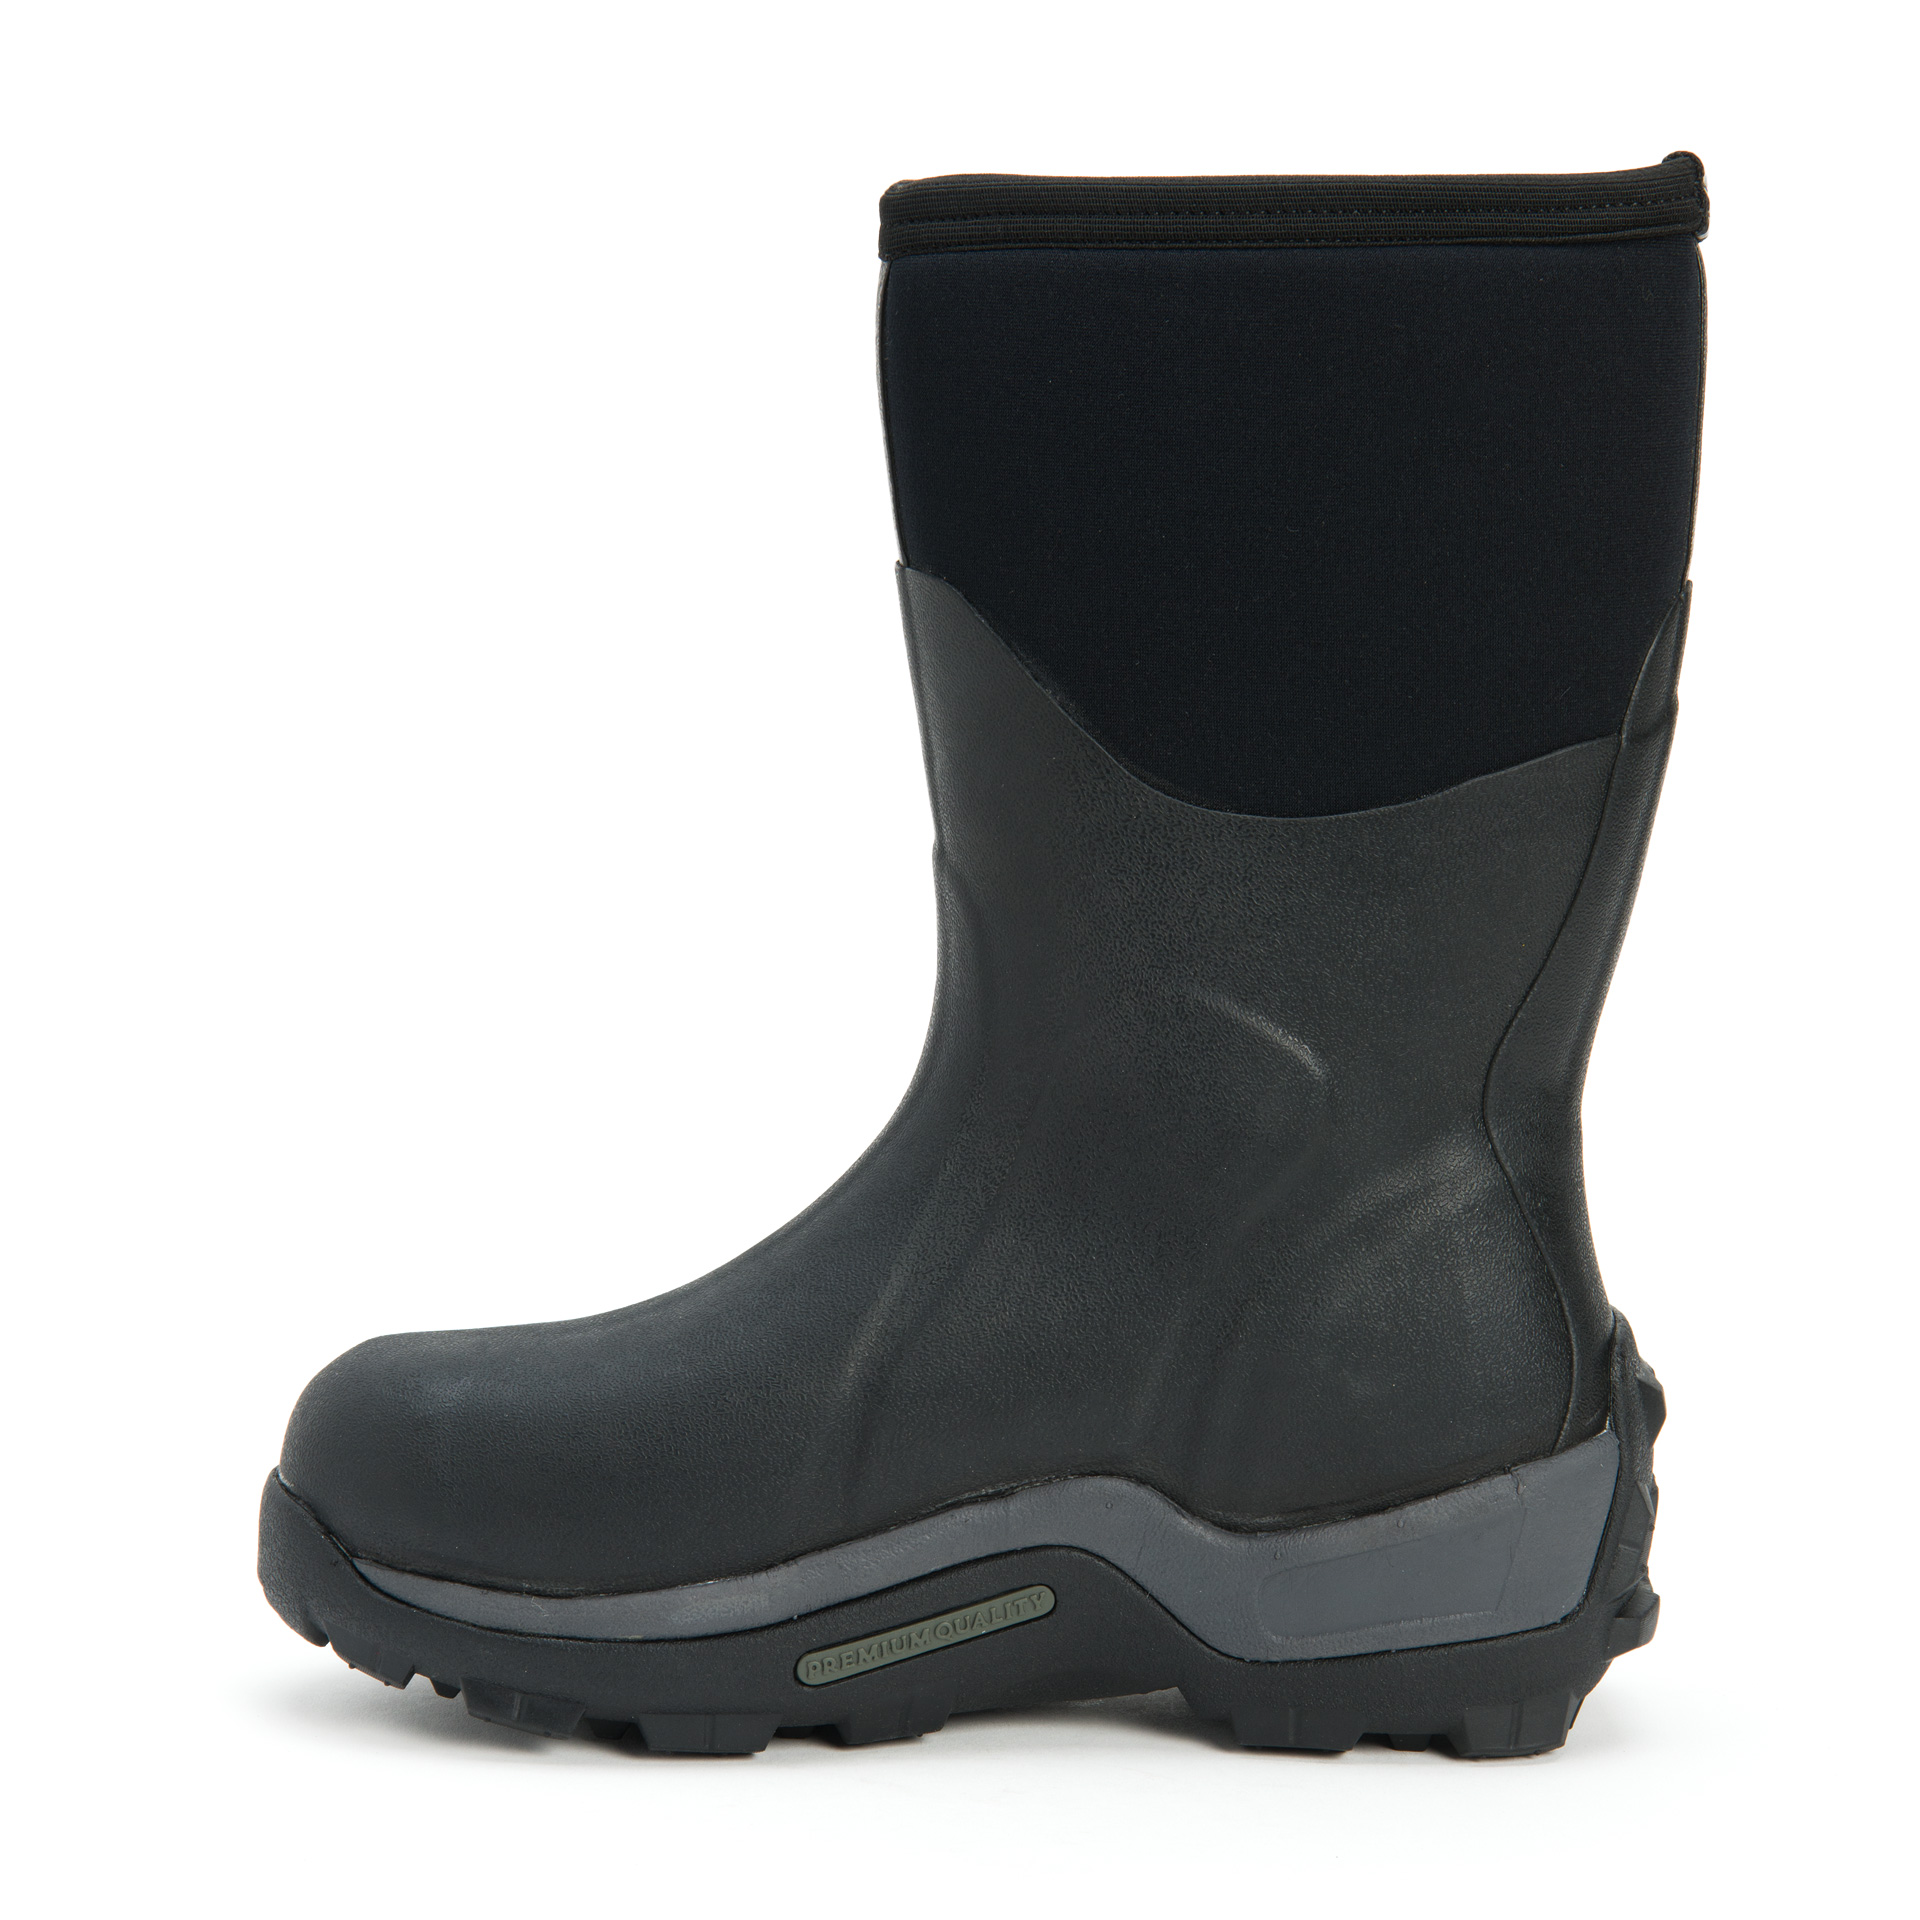 Muck Men's Arctic Sport Mid Rubber Work Boots from Columbia Safety